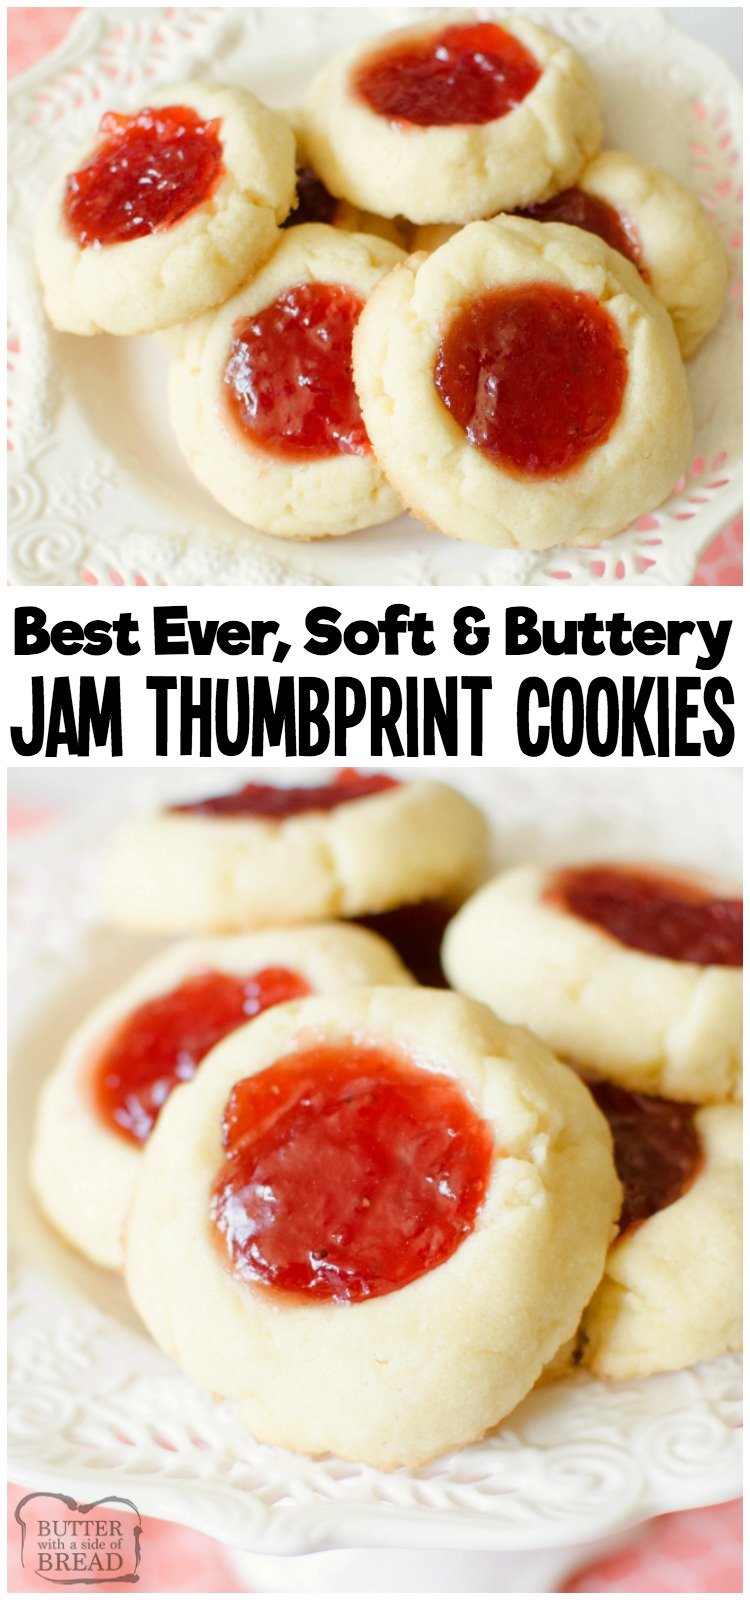 Easy recipe for Soft Jam Thumbprint Cookies perfect for the holidays! Buttery cookies with great flavor, filled with your favorite sweet jam. Perfect for Christmas cookie exchanges!  #cookies #recipe #baking #dessert #thumbprints #cookie #jam #Christmas from BUTTER WITH A SIDE OF BREAD